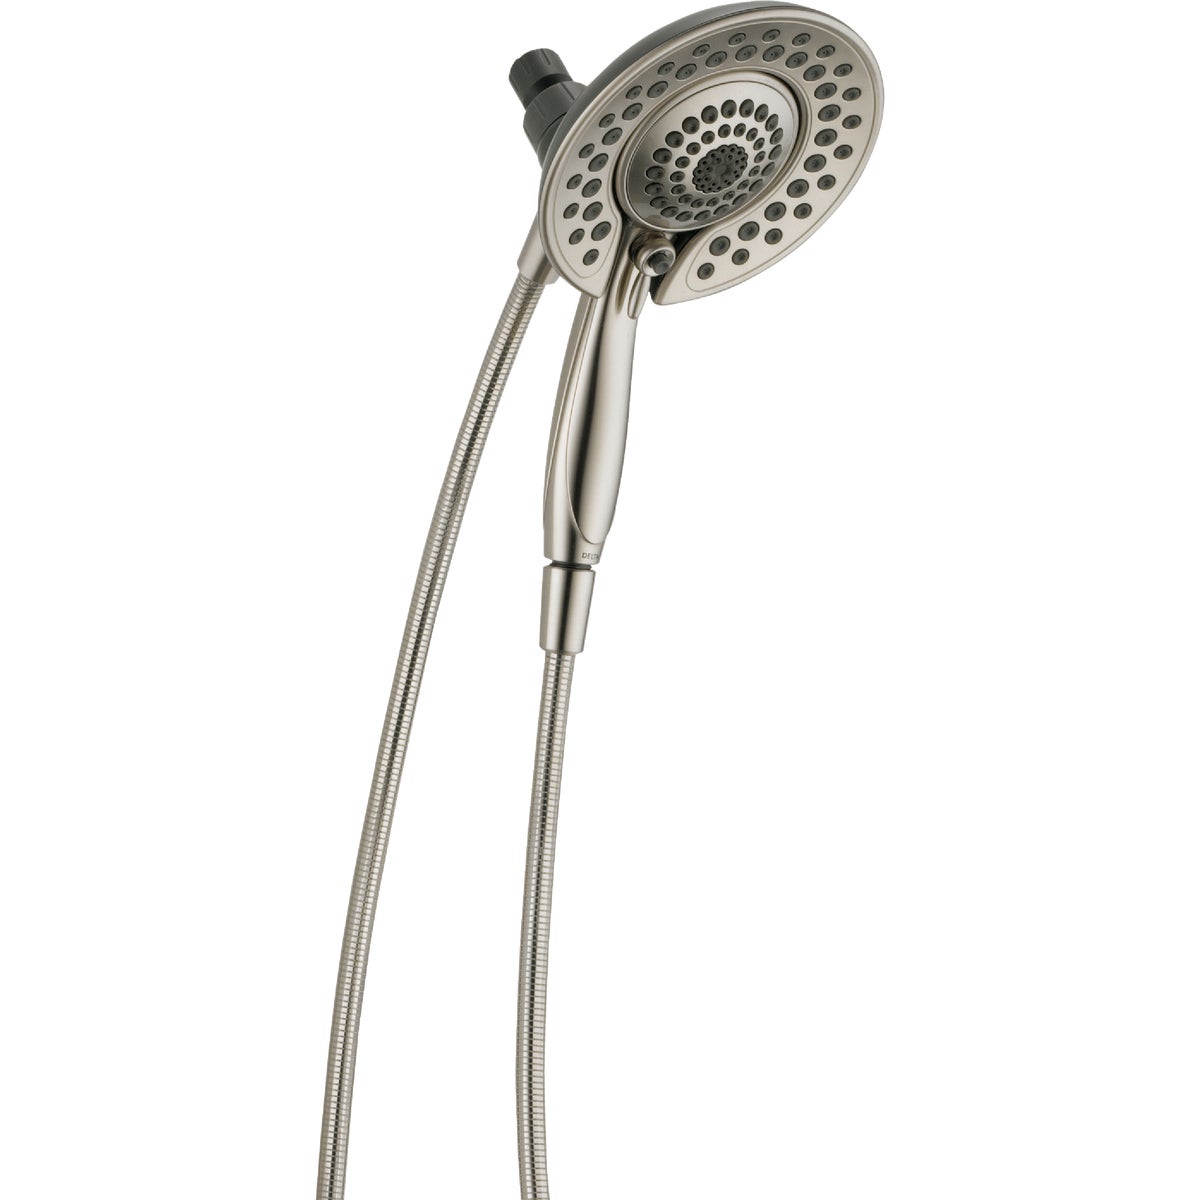 Delta In2ition 5-Spray 1.8 GPM Combo Handheld Shower & Showerhead, Brushed Nickel